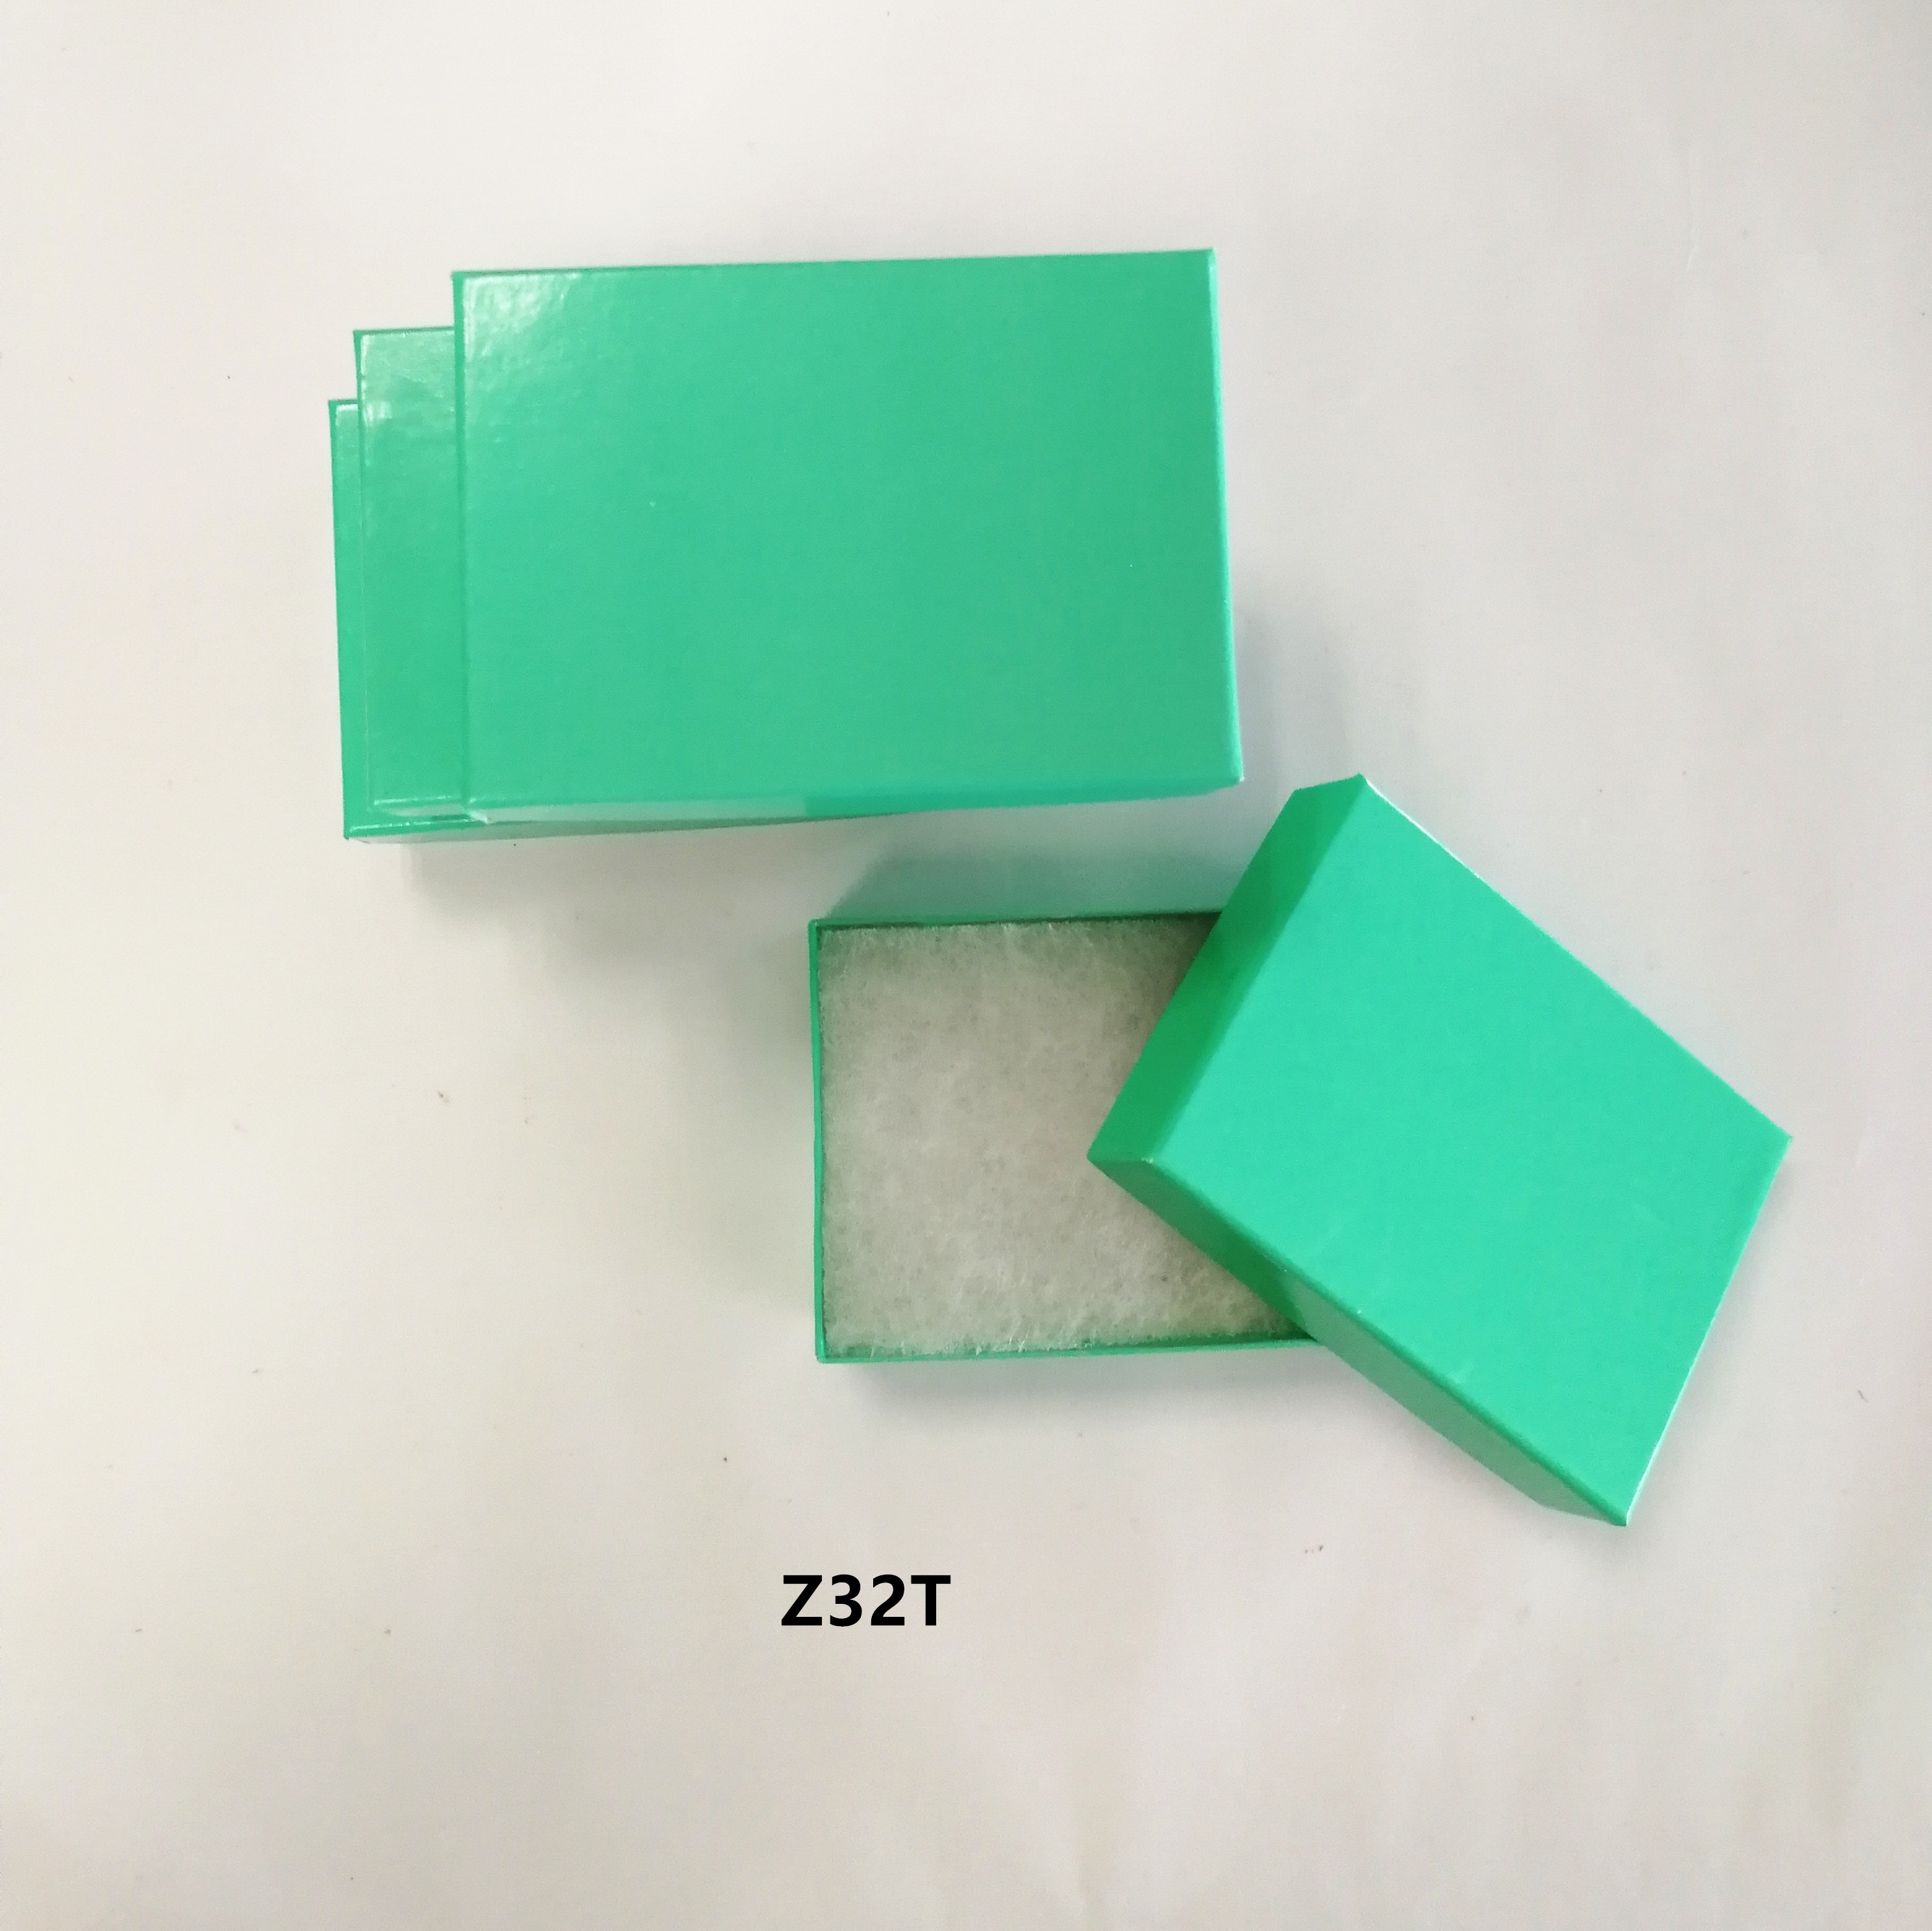 #32 Teal Green cotton filled paper box